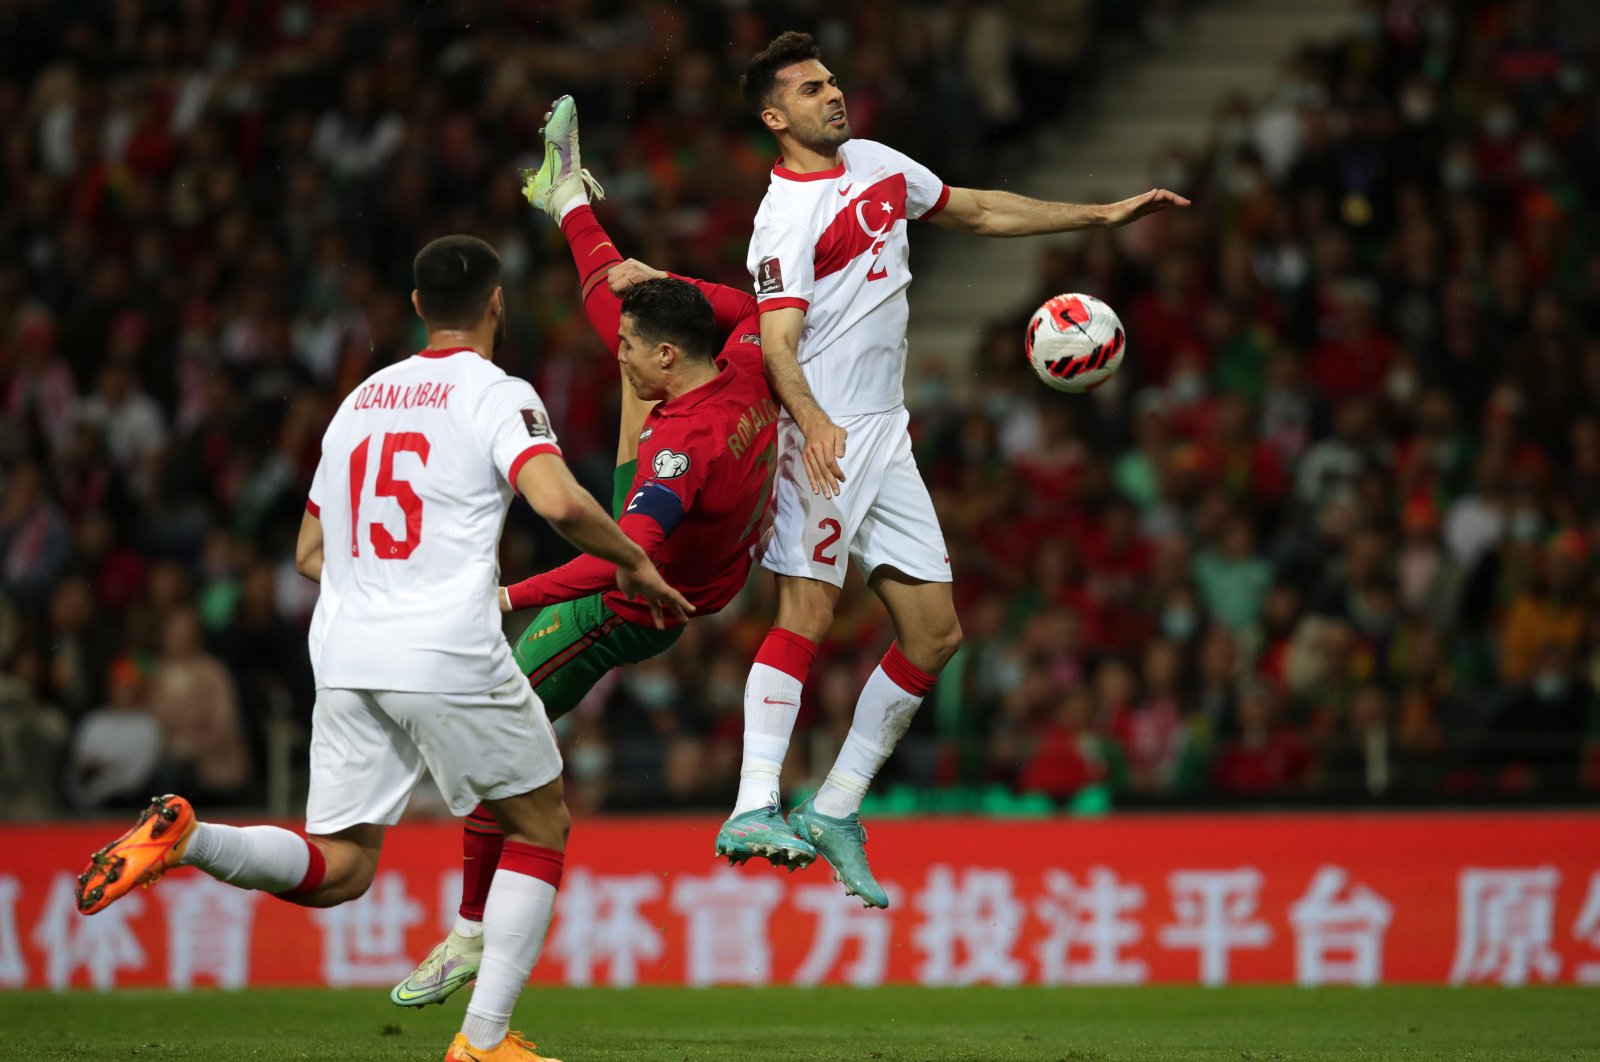 Portugal players Cristiano Ronaldo (C) in action against Turkey players Ozan Kabak (L) and Zeki Çelik during the FIFA World Cup Qatar 2022 play-off qualifying soccer match between Portugal and Turkey held on Dragao stadium in Porto, Portugal, 24 March 2022. (EPA Photo)